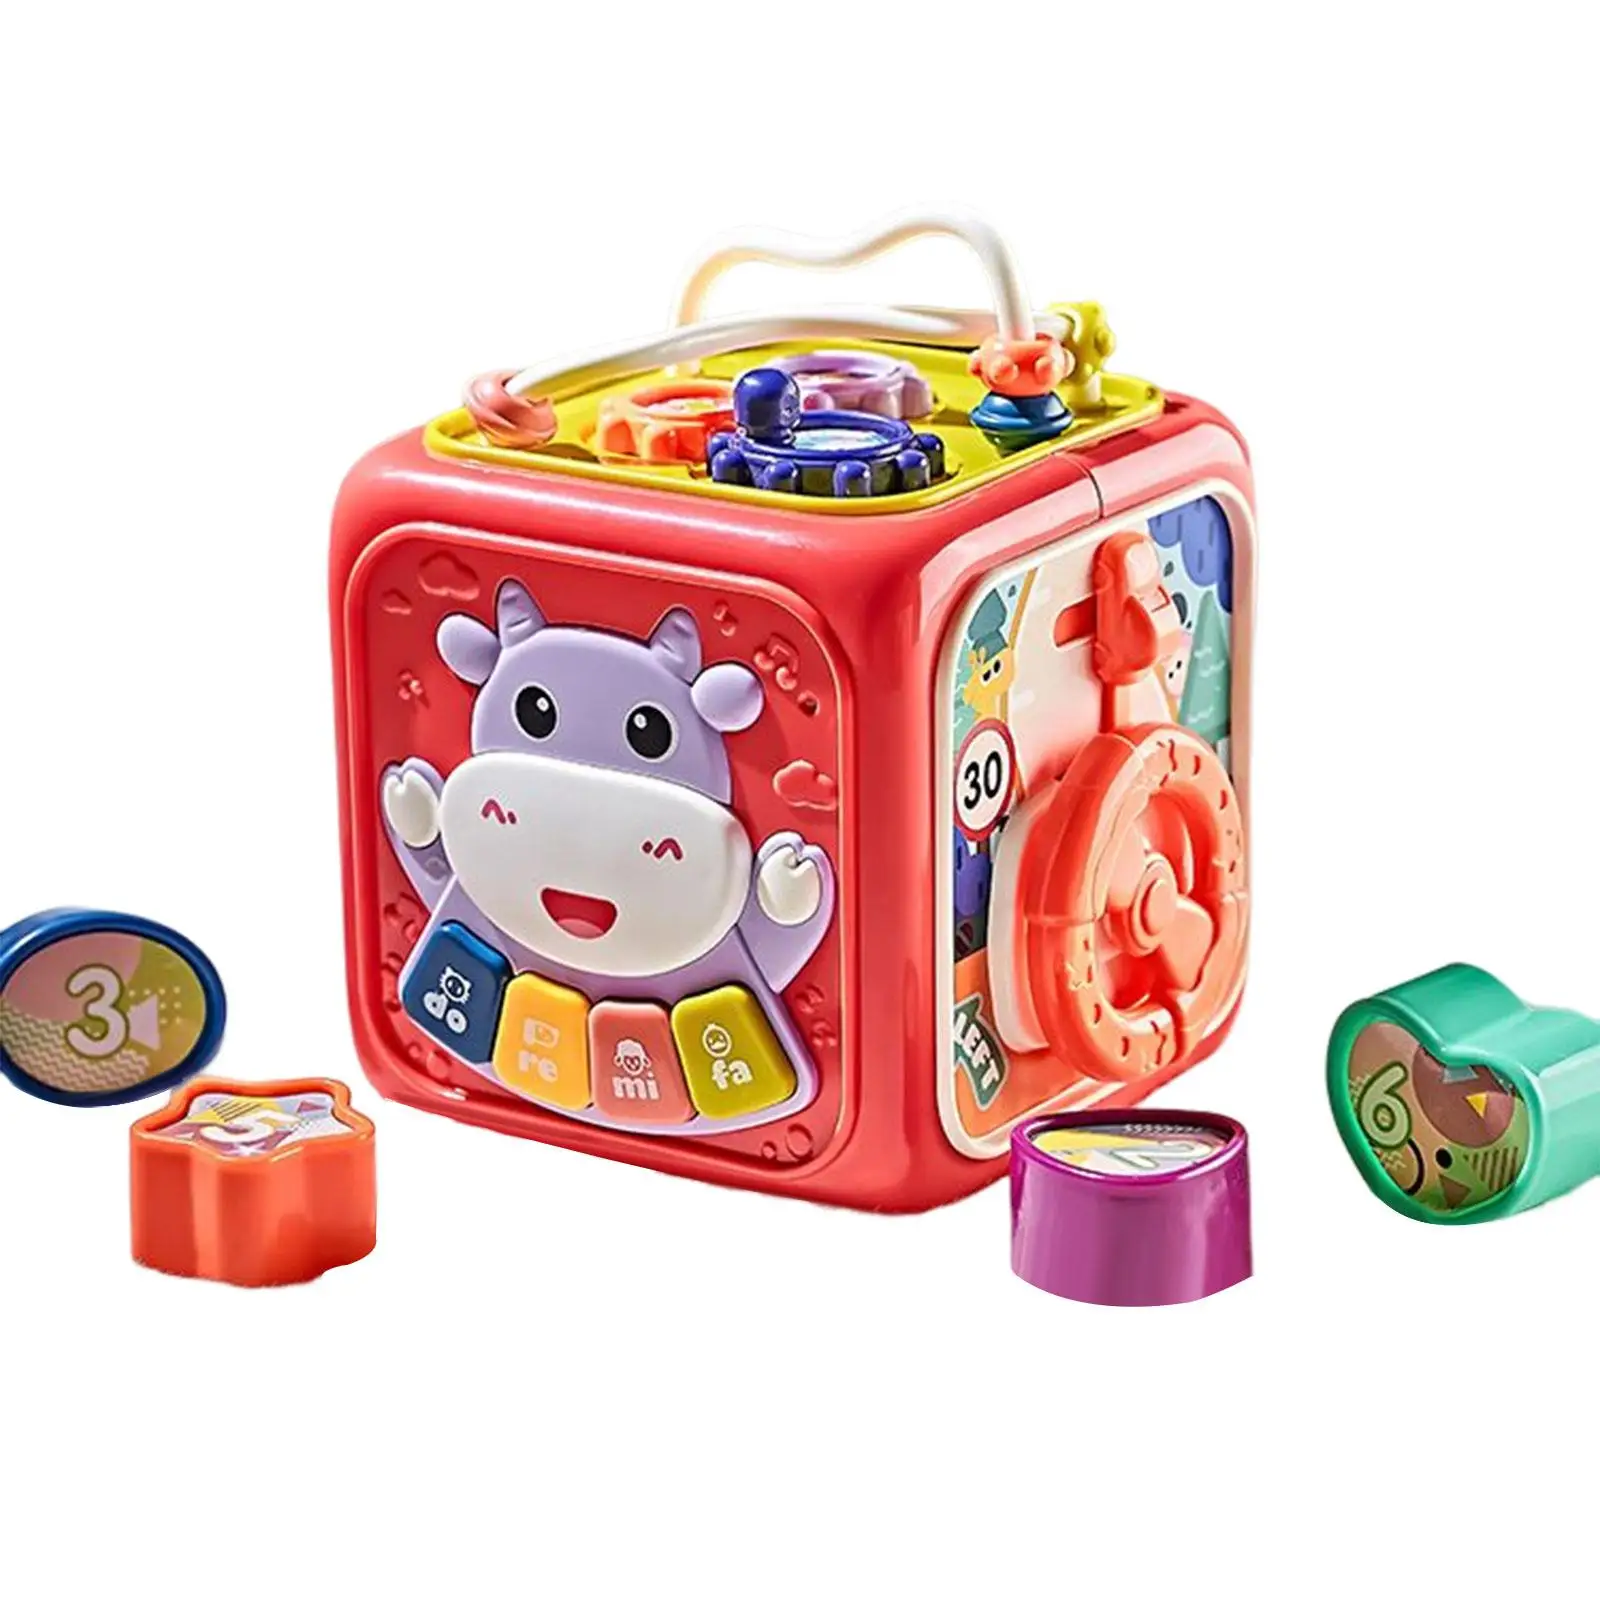 Baby Toy Activity Cube Toy for Age 1 + Year Old 6 Month Old Baby Toys